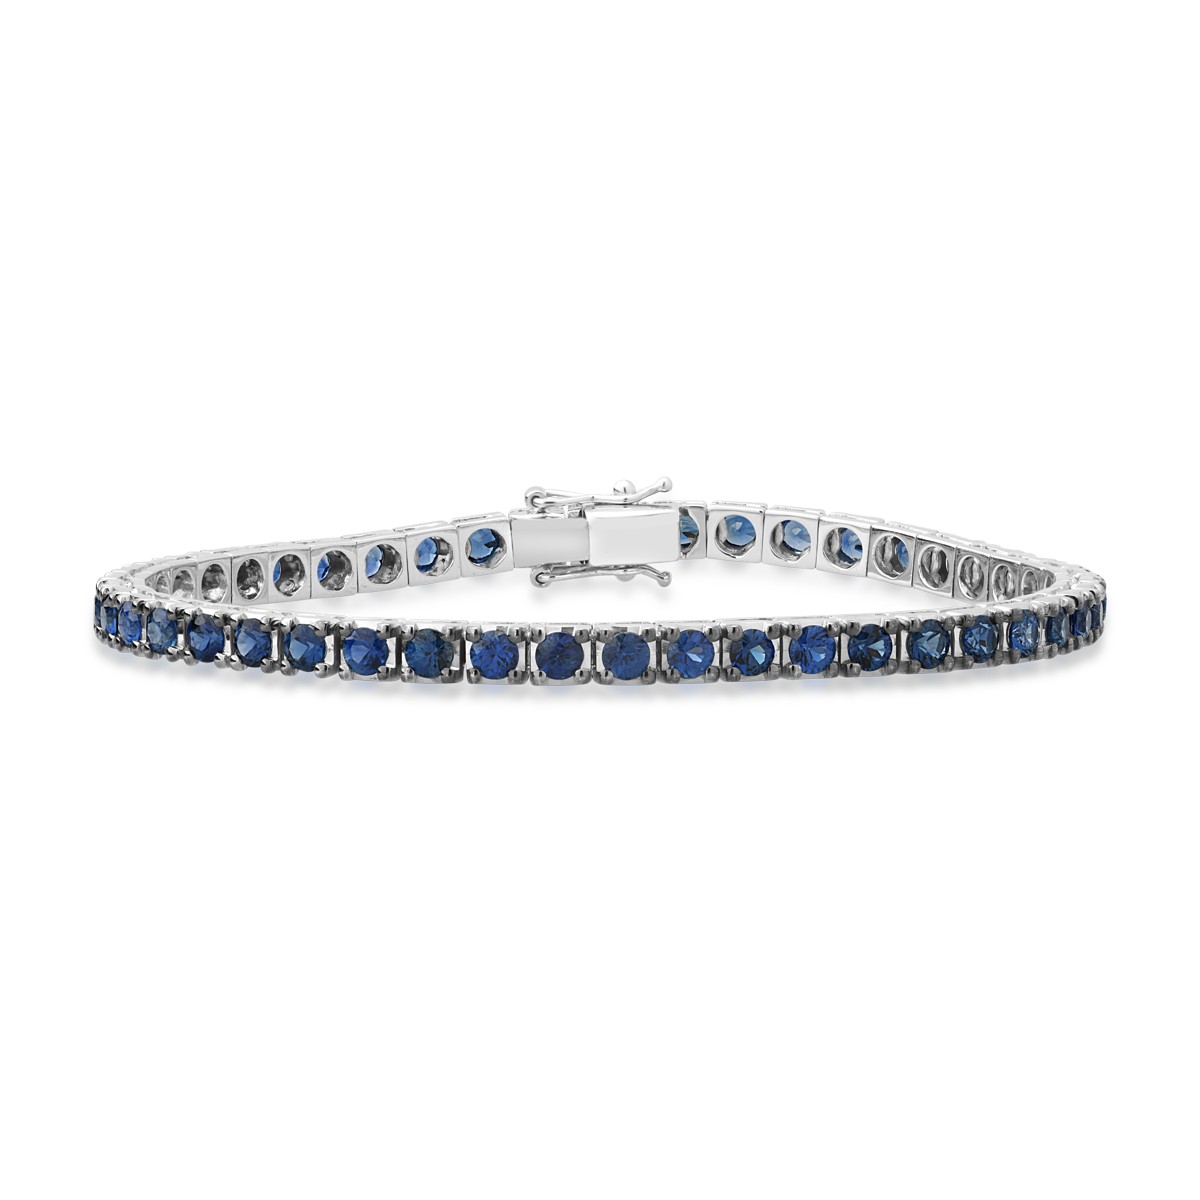 18K white gold bracelet with 6.7ct sapphires